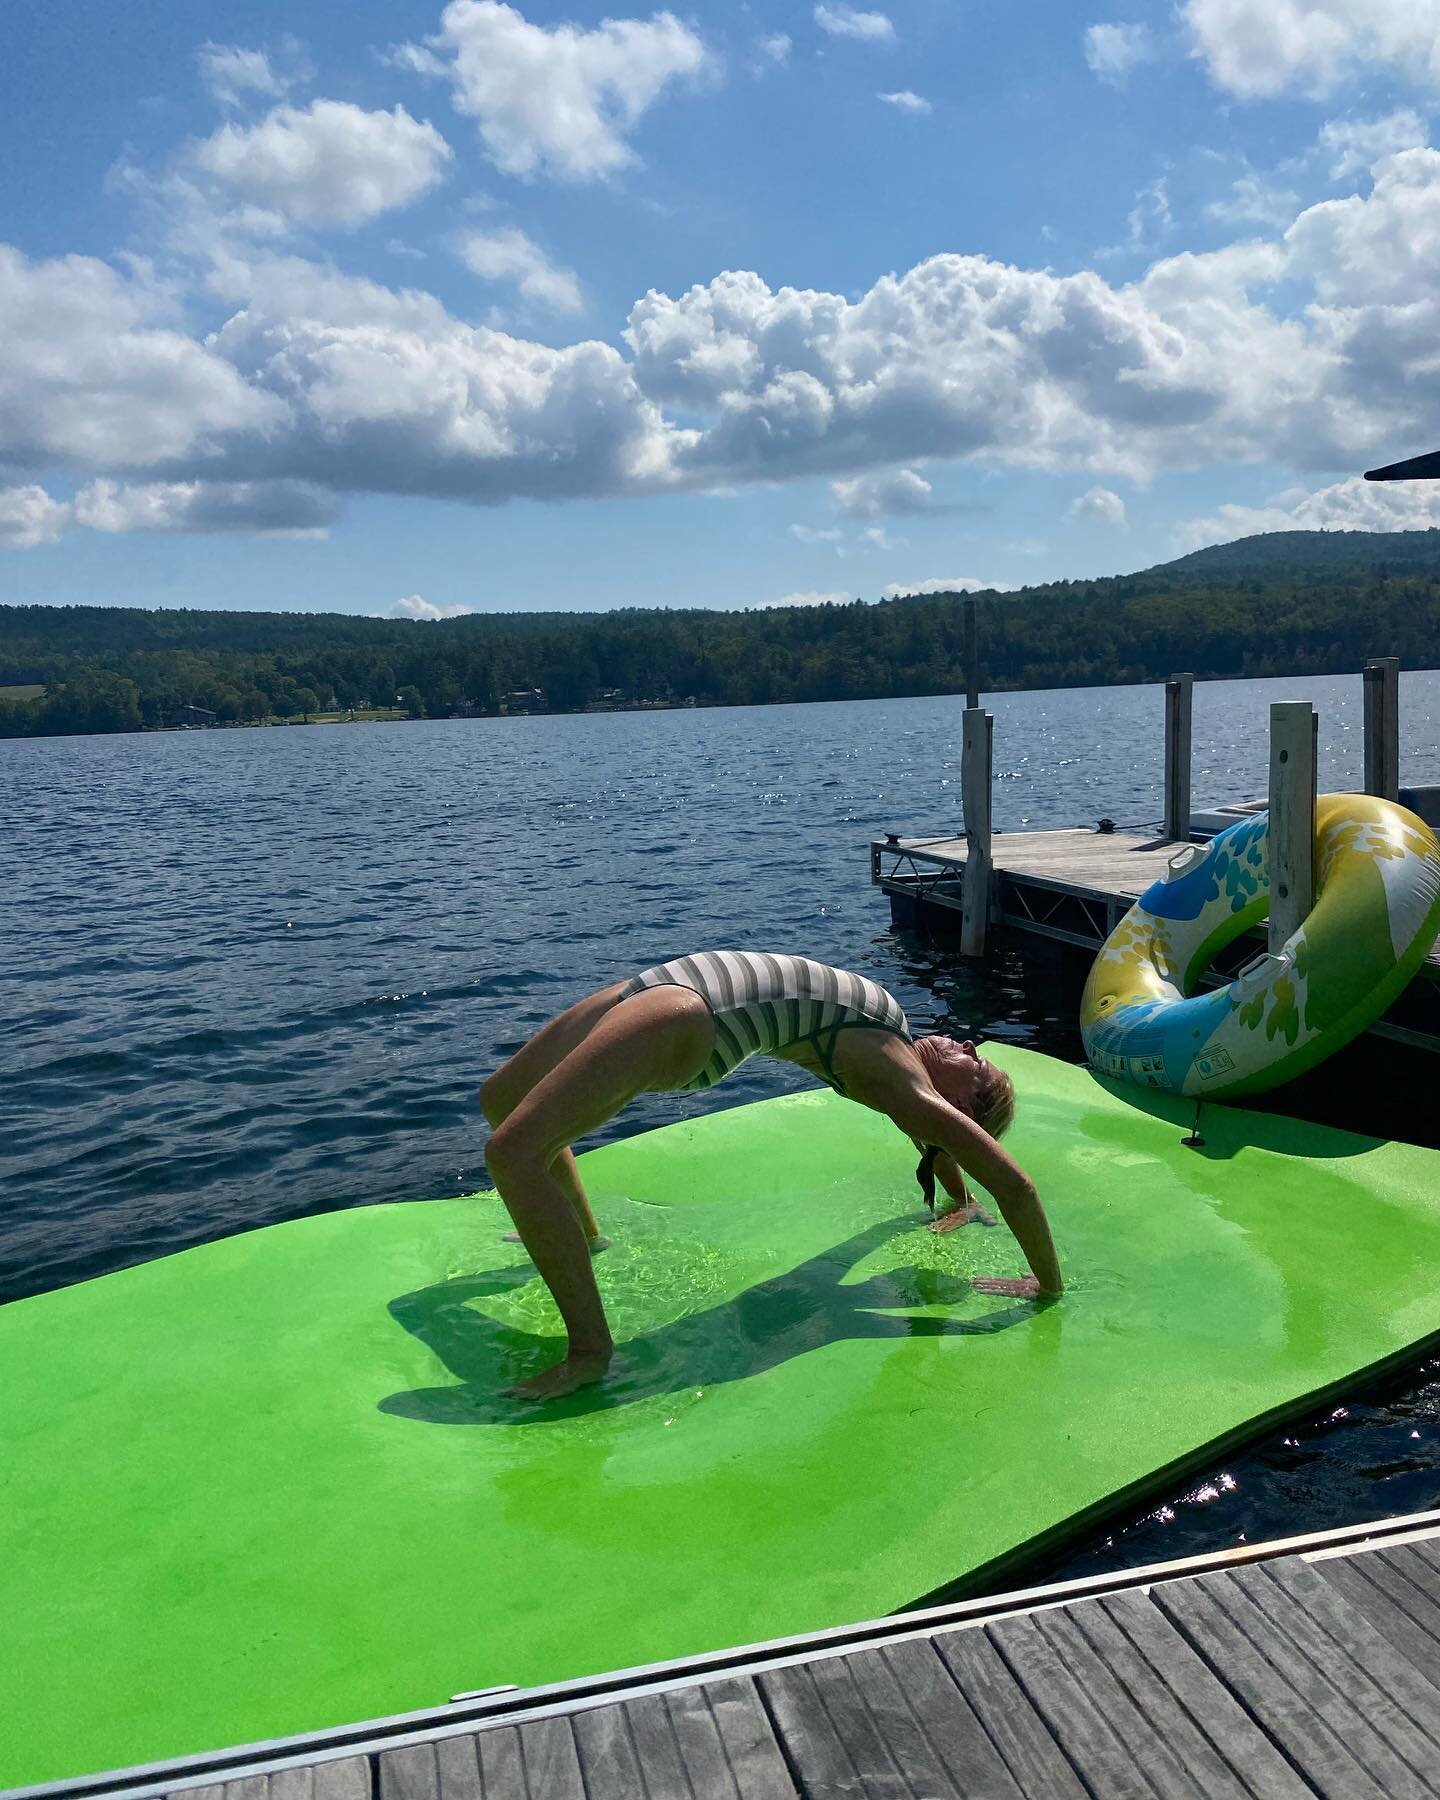 Stretching out Summer  #brantlake 
#andispeople 
#yogawheel #yogamama #simplethings #stretchyourself